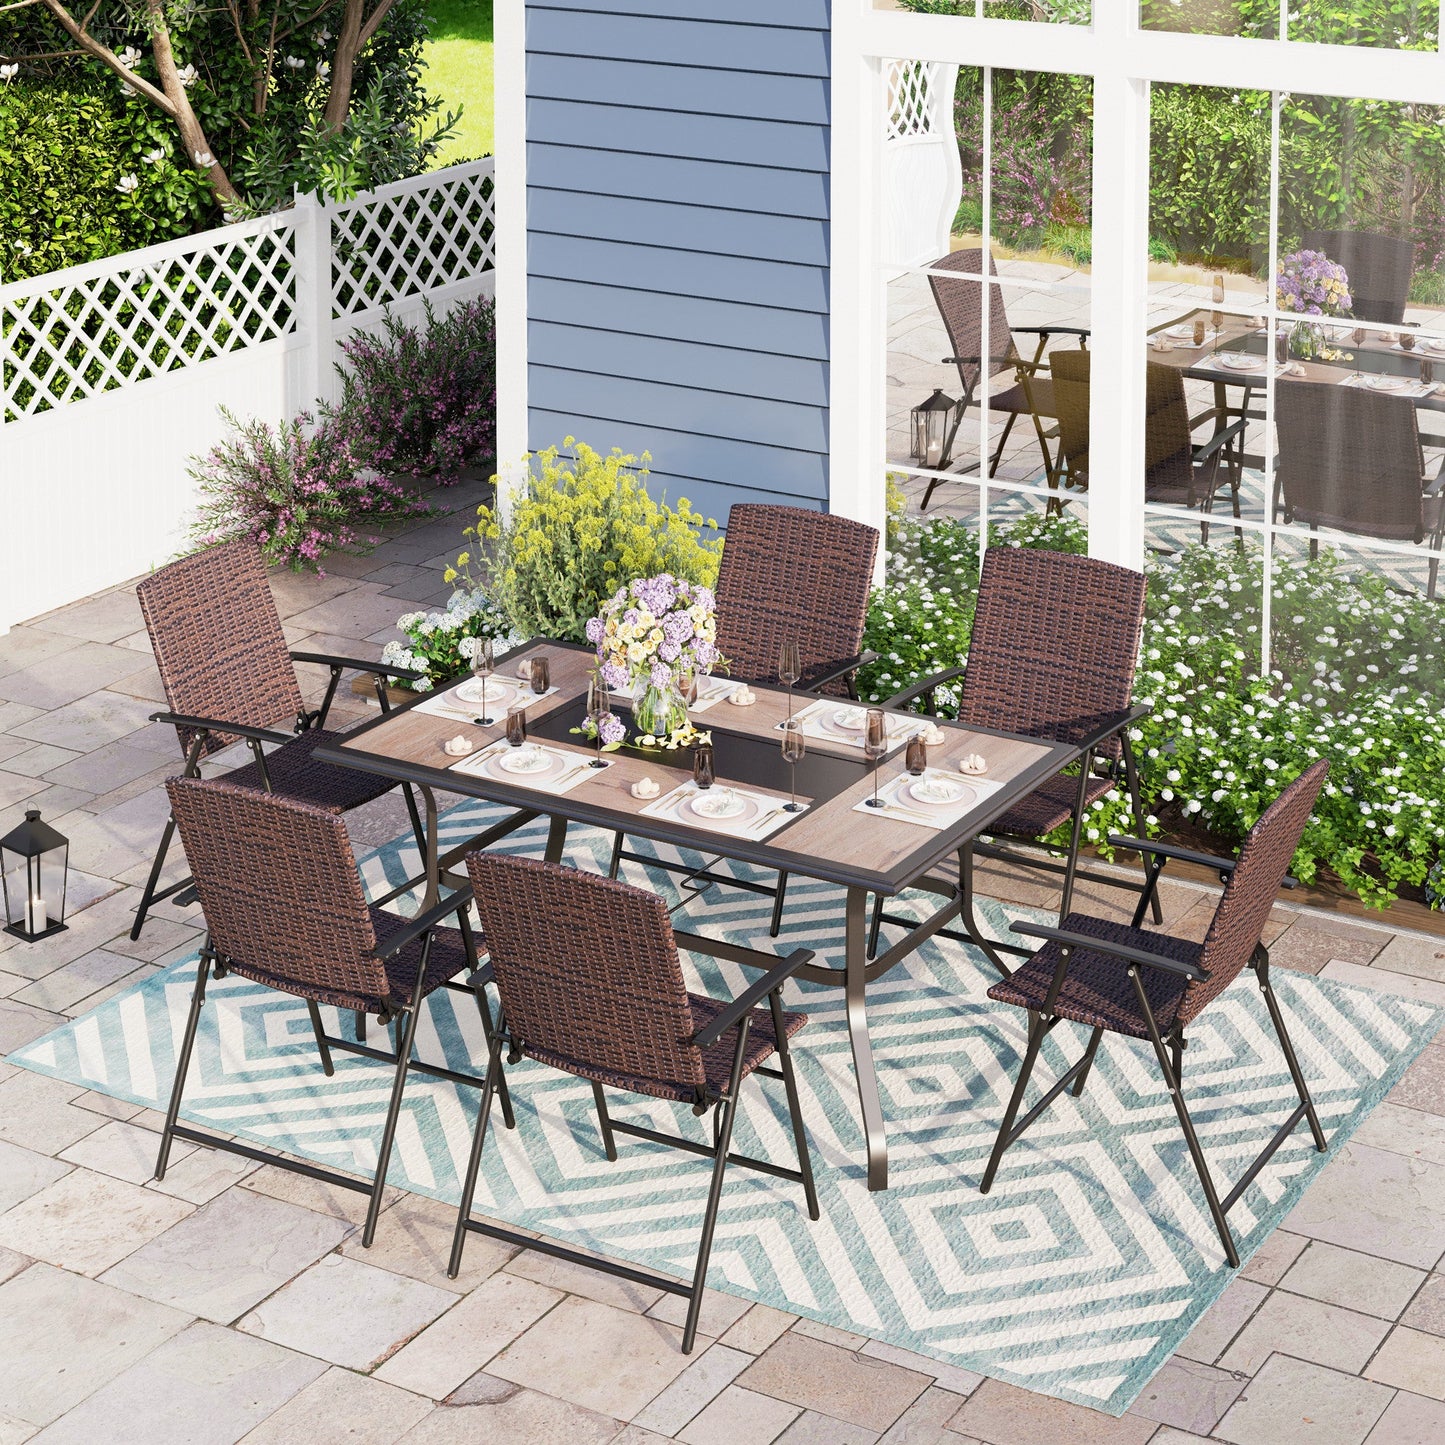 Sophia & William 7 Pieces Wicker Patio Dining Set Foldable Chairs and Table Set